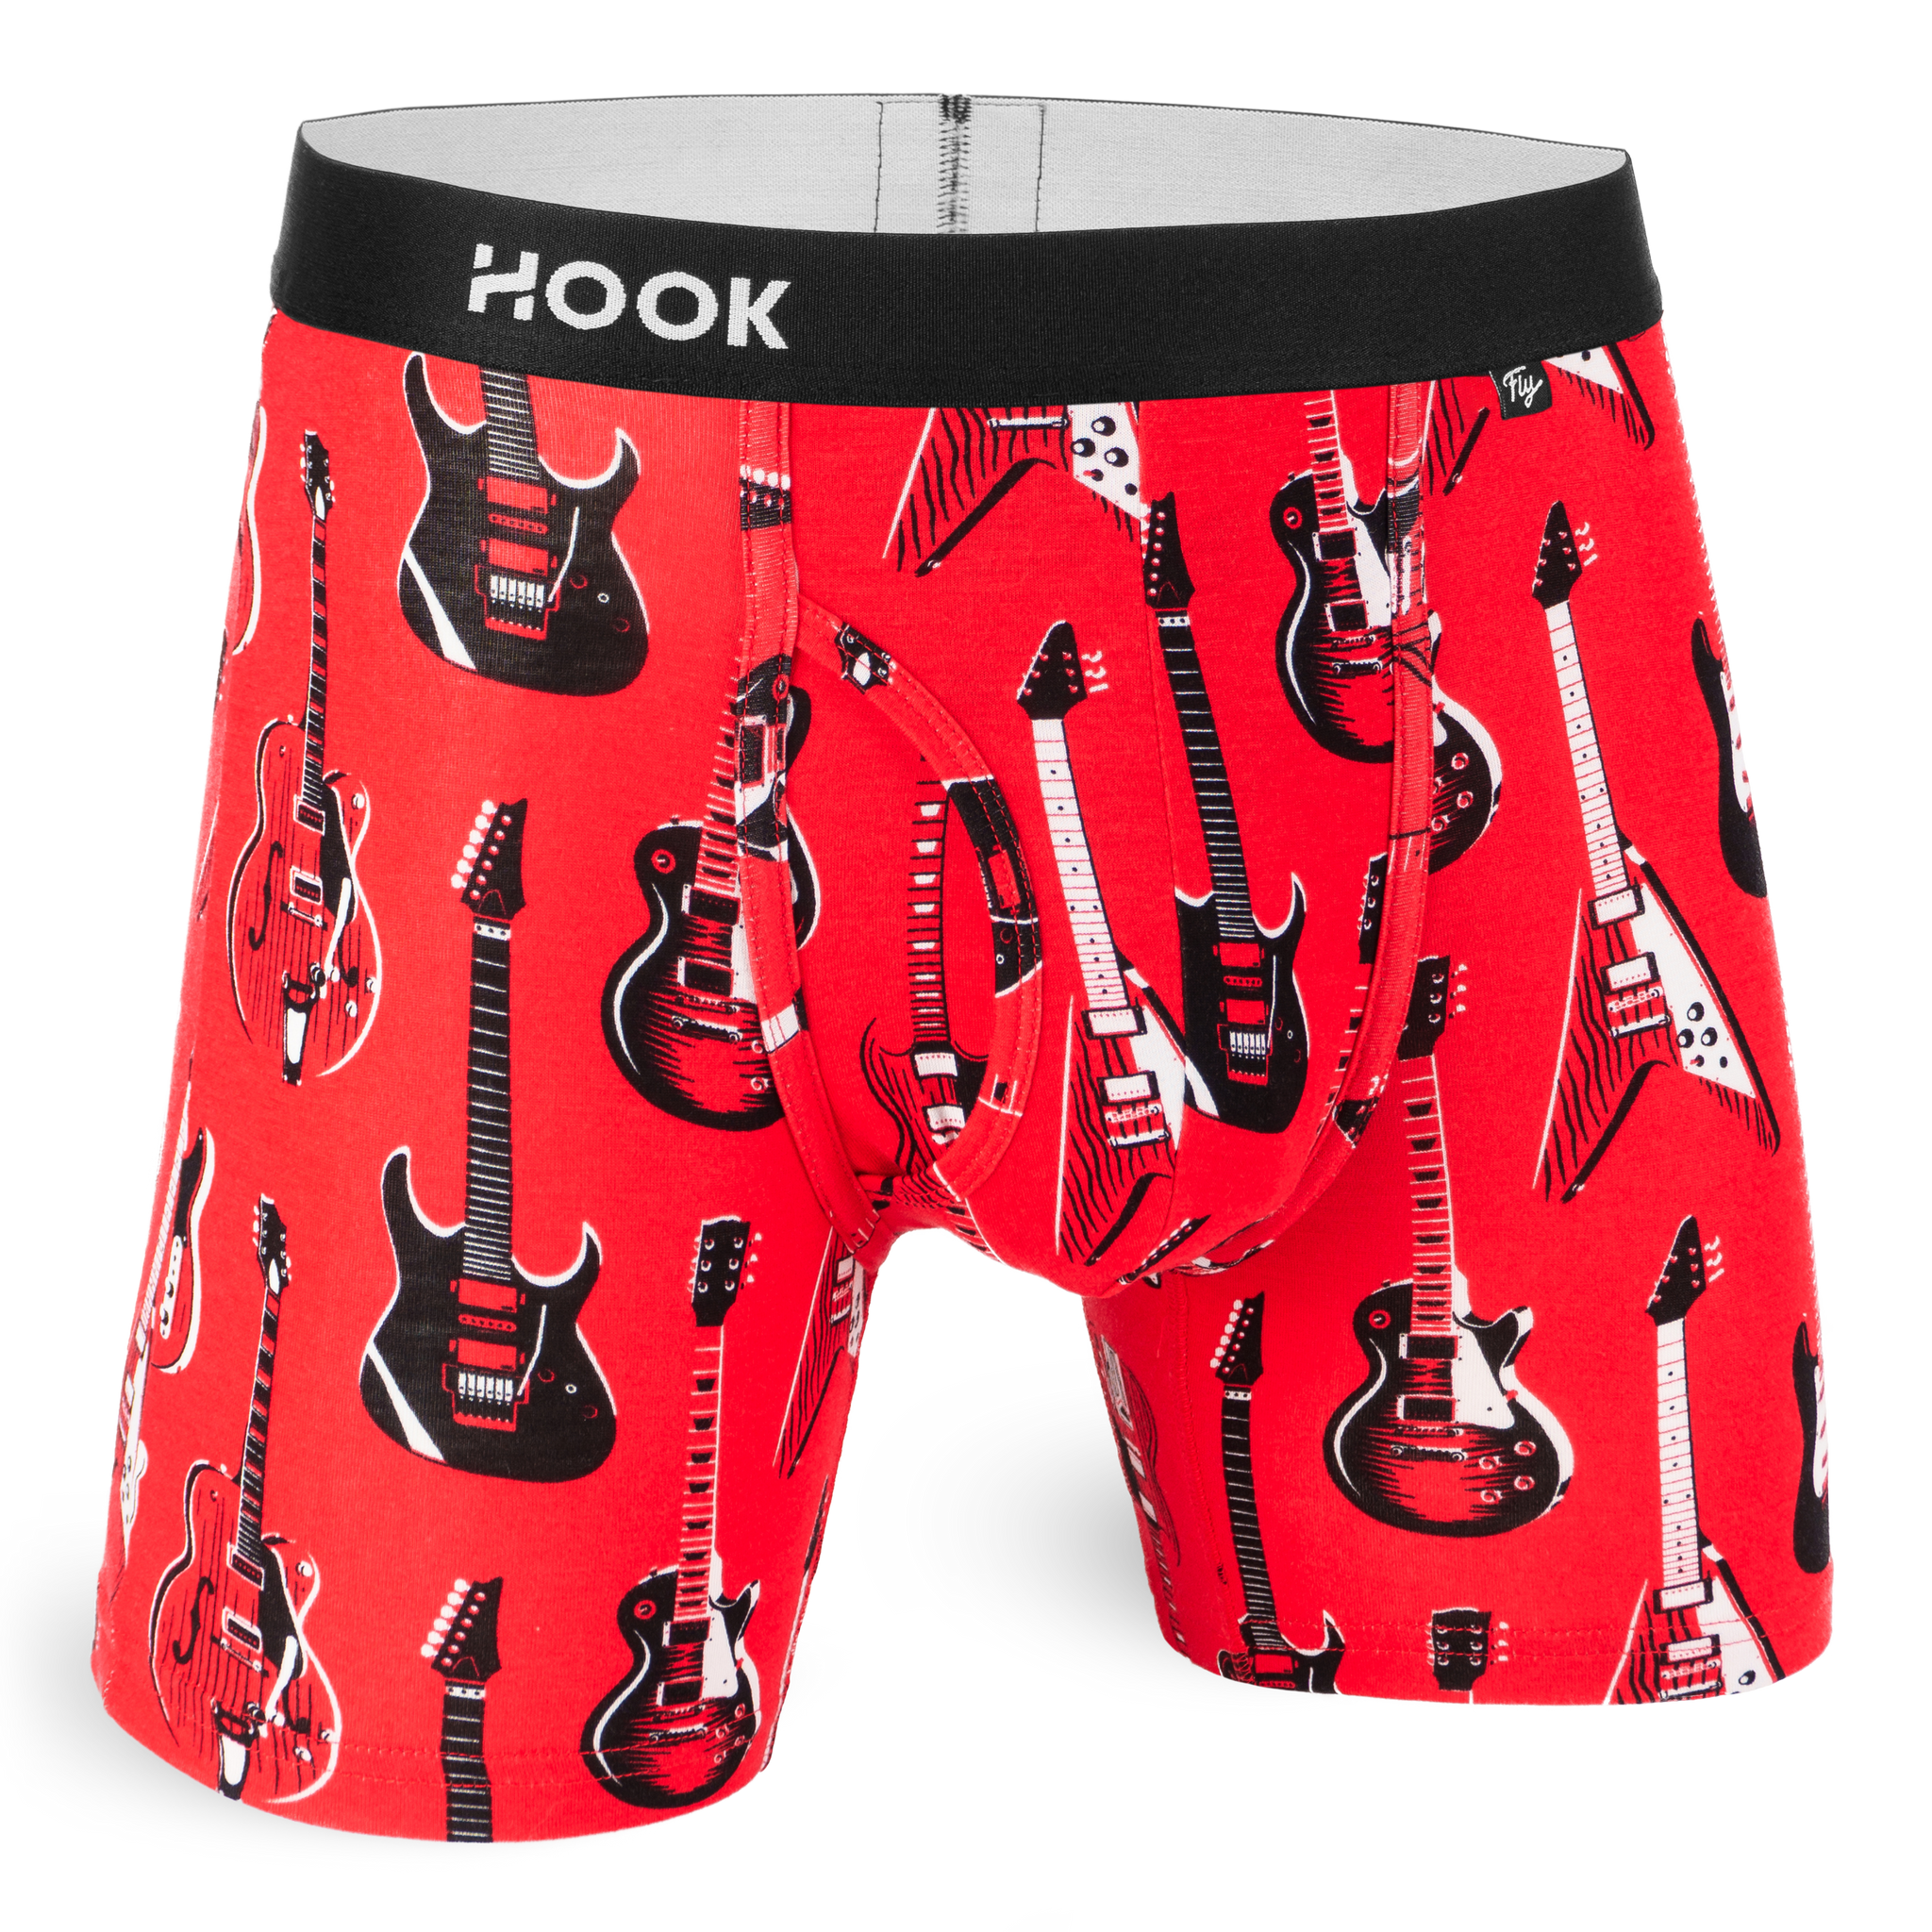 Fly Boxer Brief : Guitar